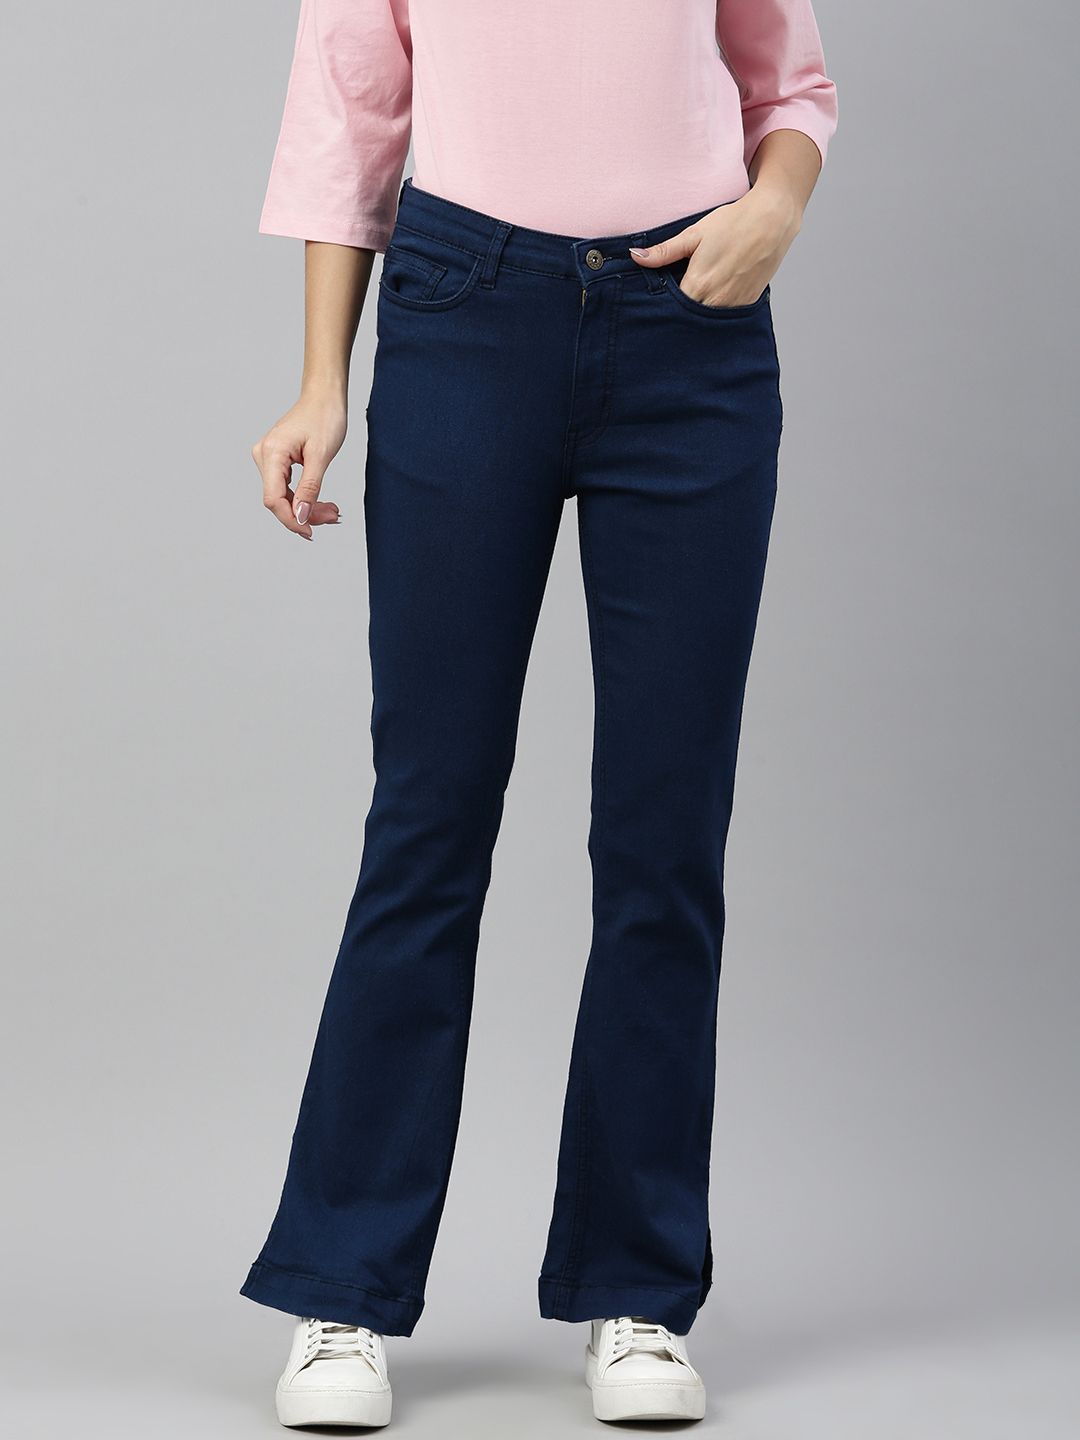 abof Women Navy Blue Slim Fit Stretchable Jeans Price in India